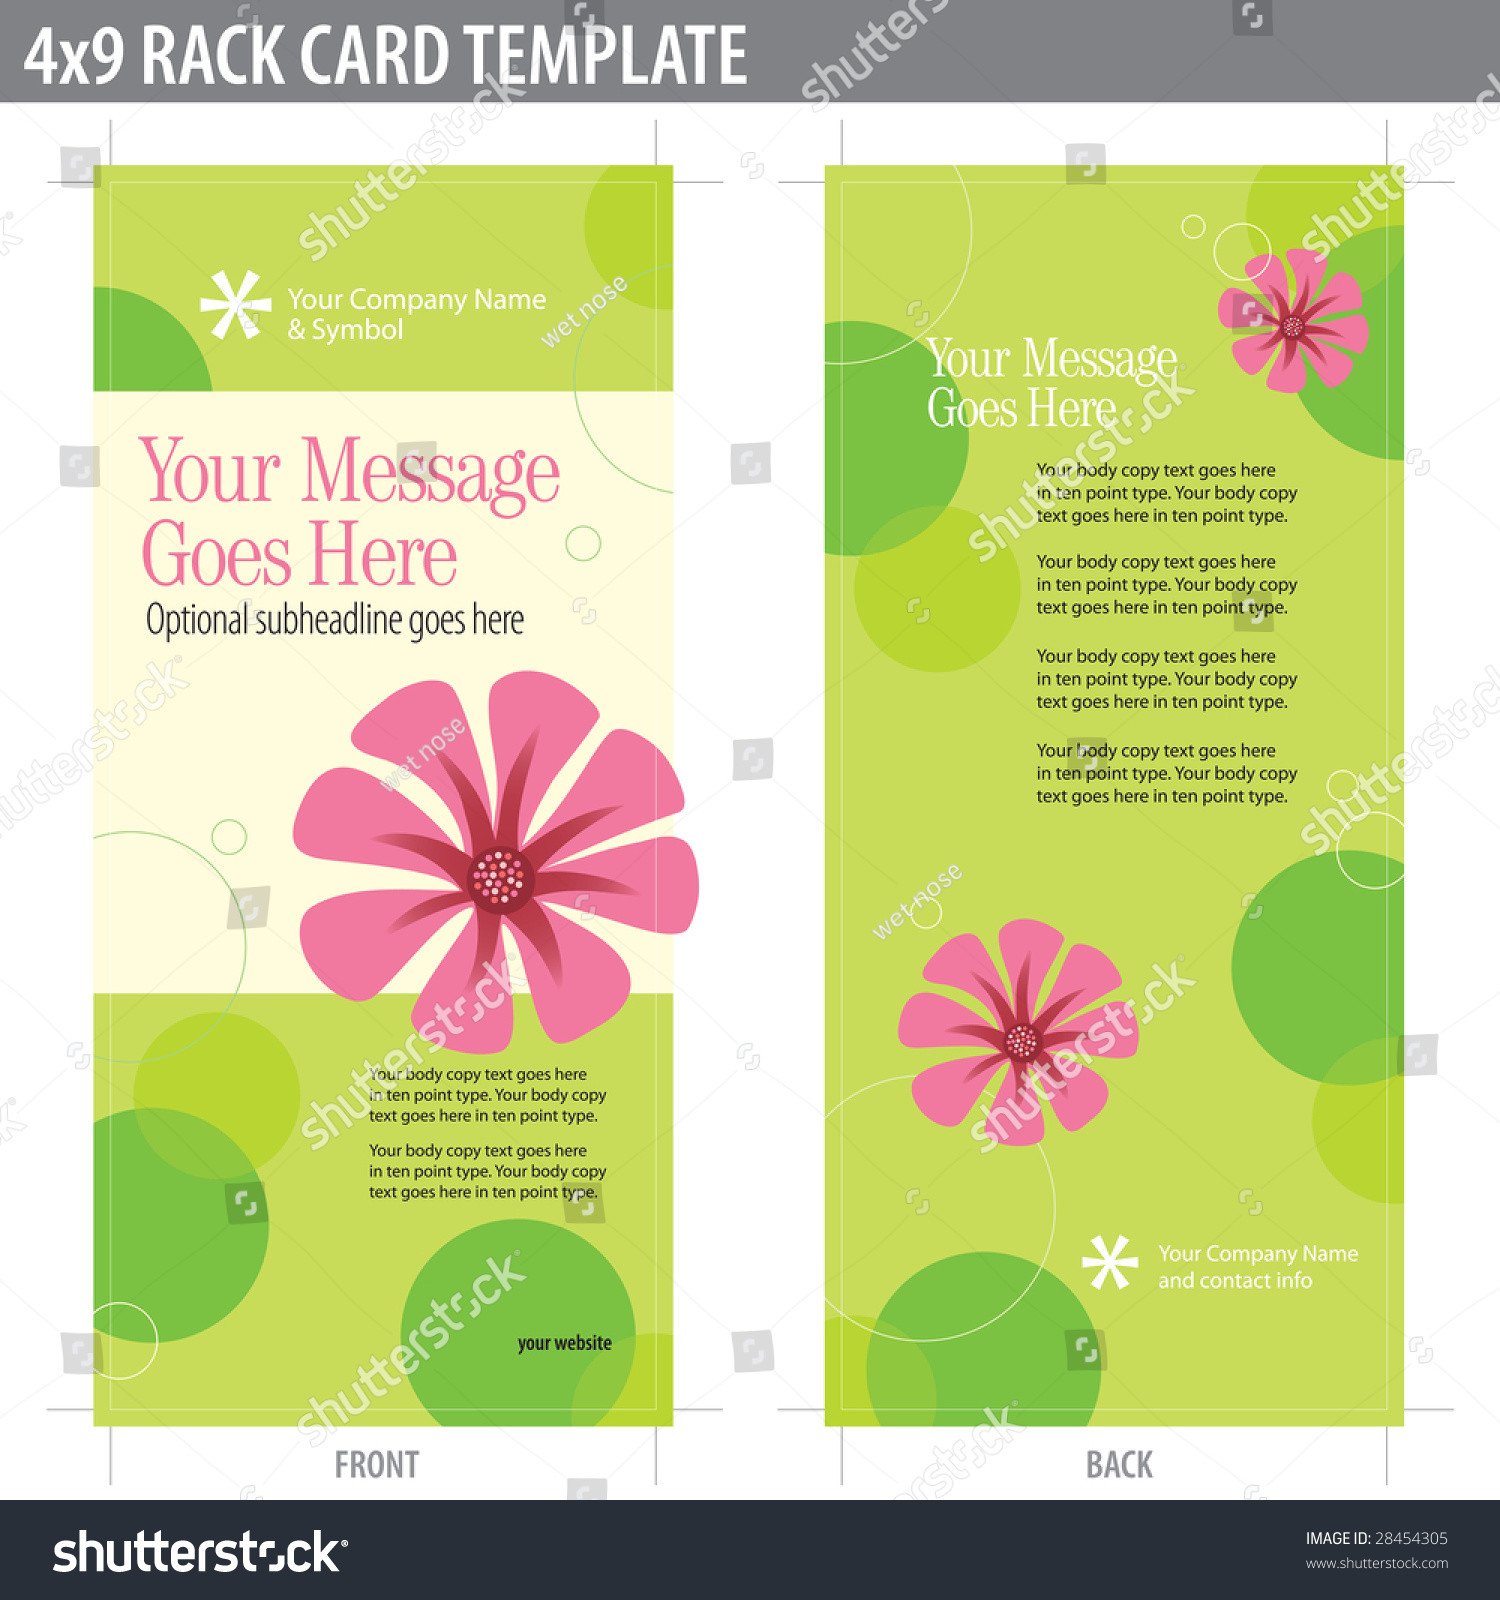 Double Sided Brochure Template 4x9 Two Sided Rack Card Brochure Includes Crop Marks